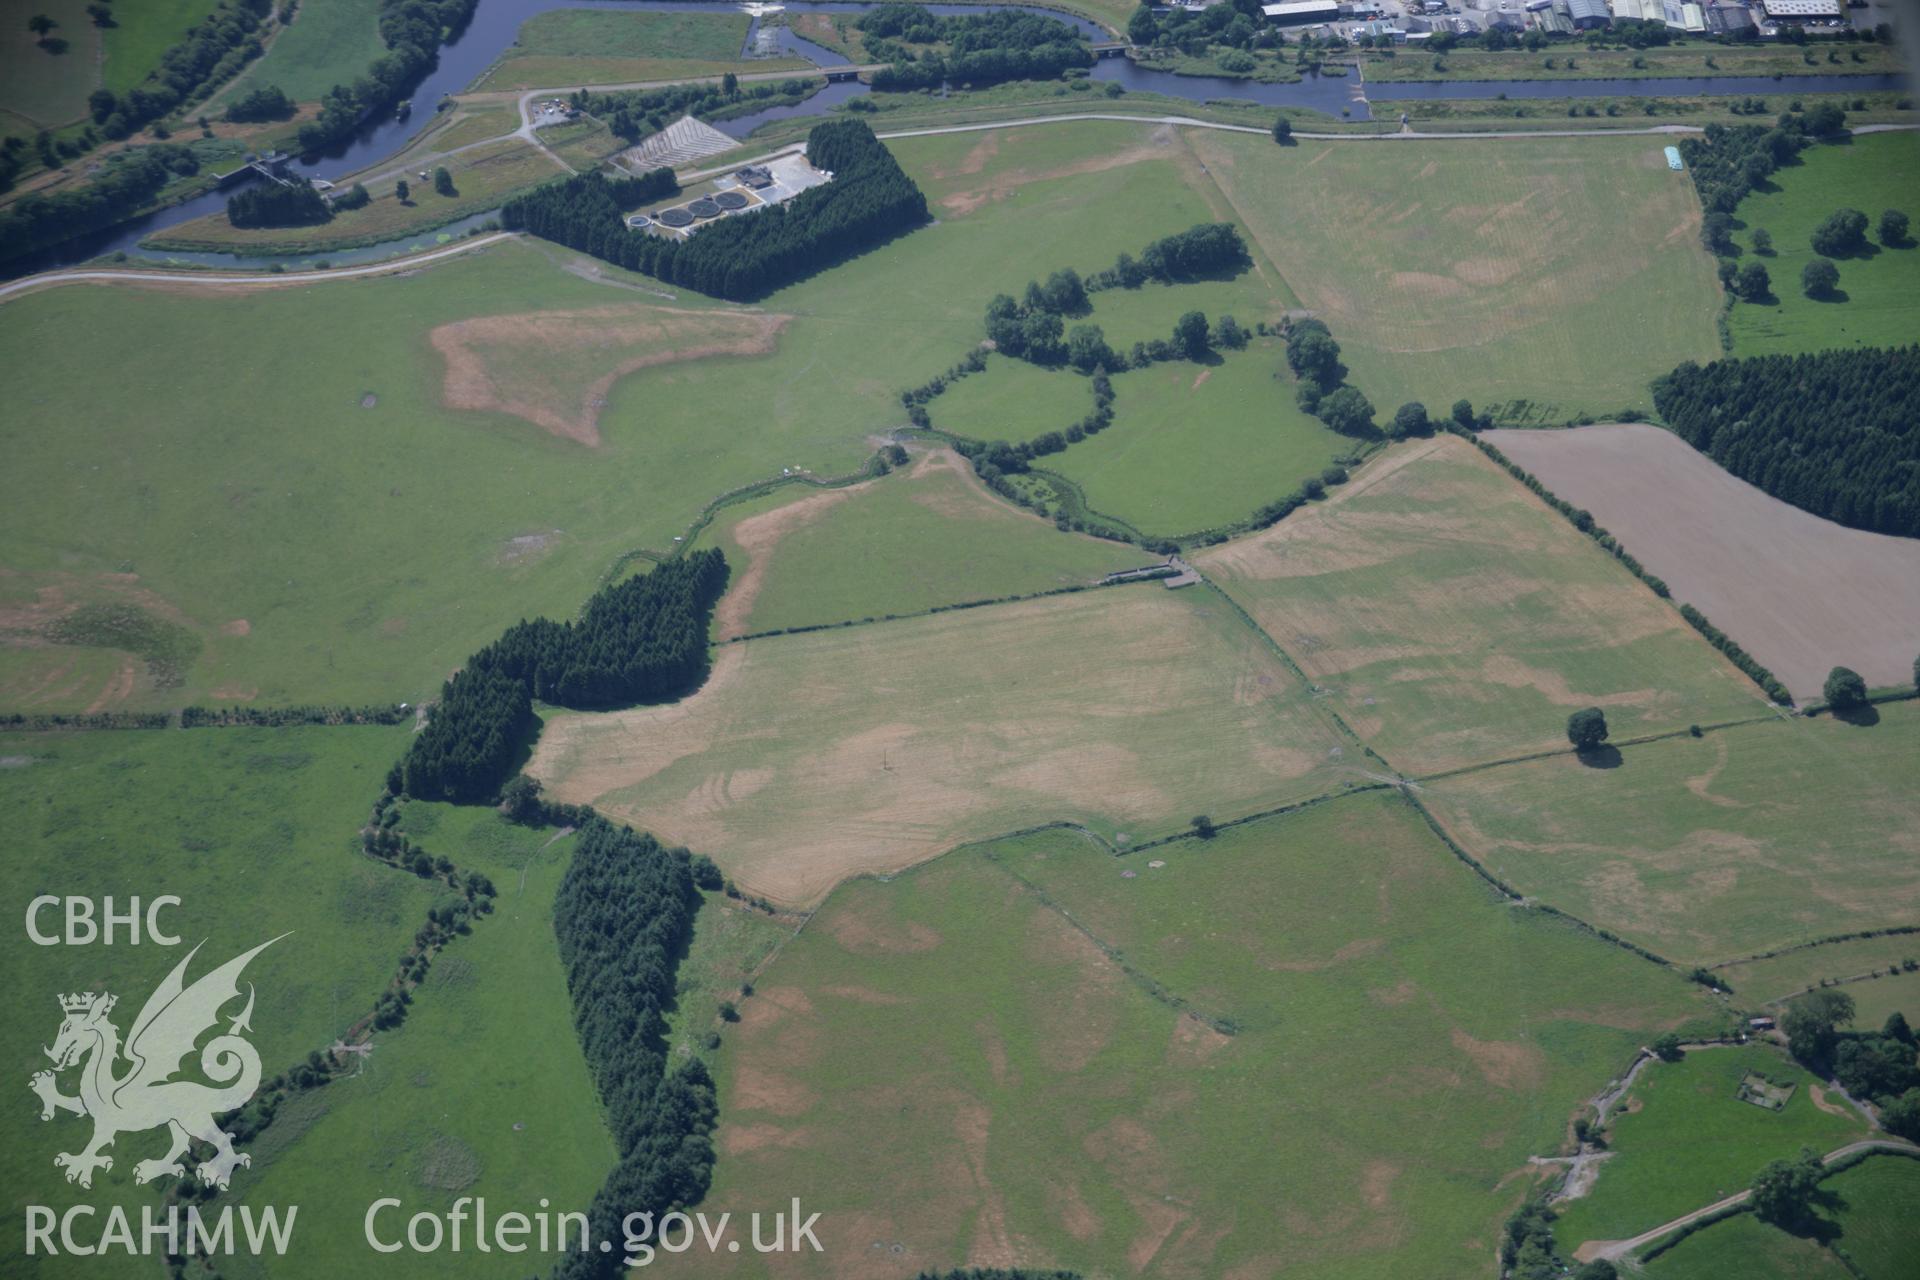 RCAHMW colour oblique aerial photograph of Llanfor Roman Fort. Taken on 25 July 2006 by Toby Driver.